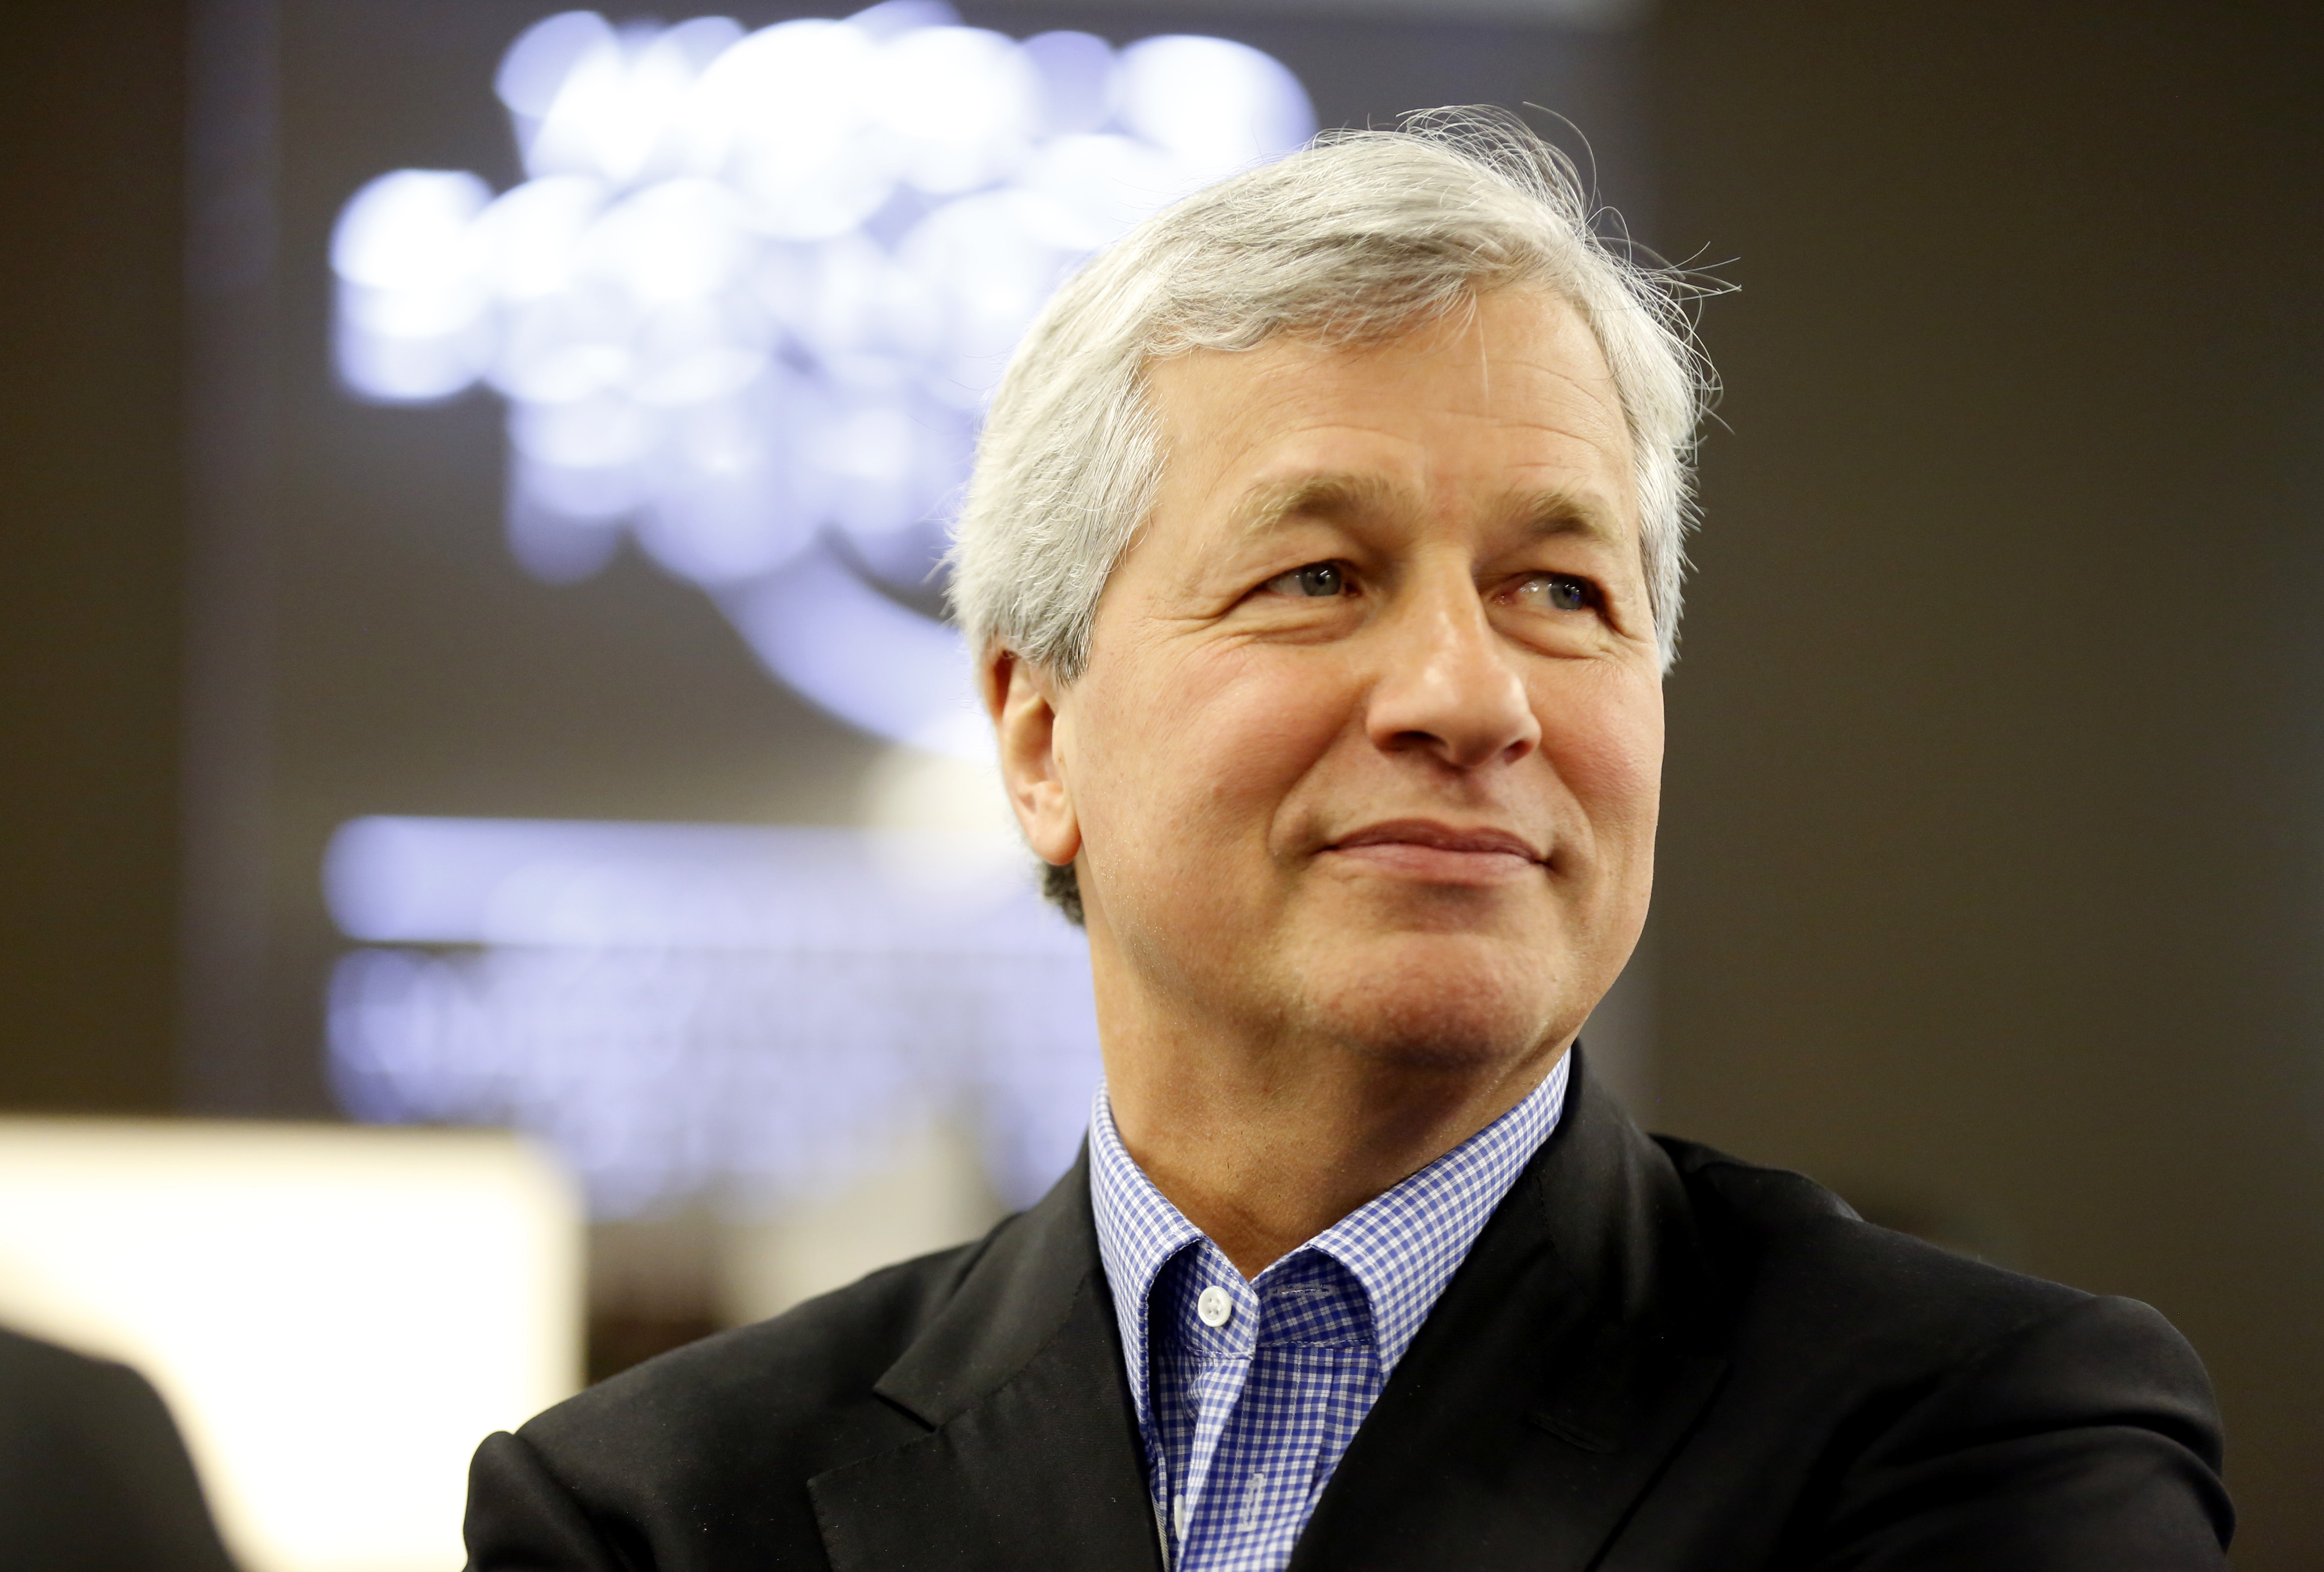 James "Jamie" Dimon, chief executive officer of JPMorgan Chase &amp; Co., pauses during a break in sessions on the opening day of the World Economic Forum (WEF) in Davos, Switzerland, on Wednesday, Jan. 22, 2014. (Bloomberg&mdash;Bloomberg via Getty Images)